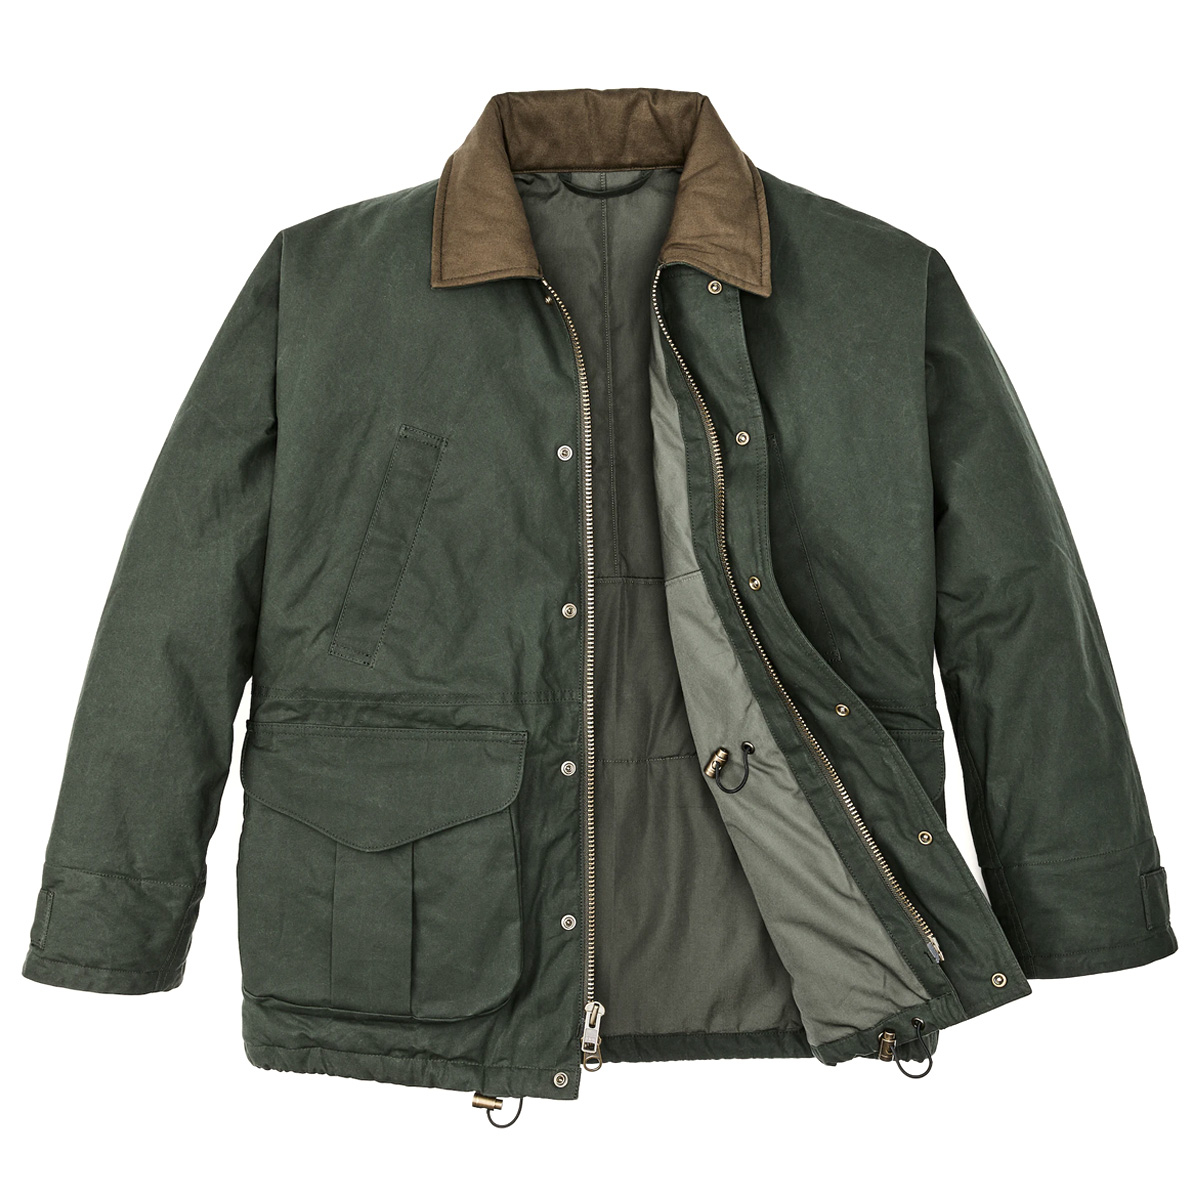 Filson Ranger Insulated Field Jacket Deep Forest, an ideal blend of traditional fabric and cutting-edge insulation